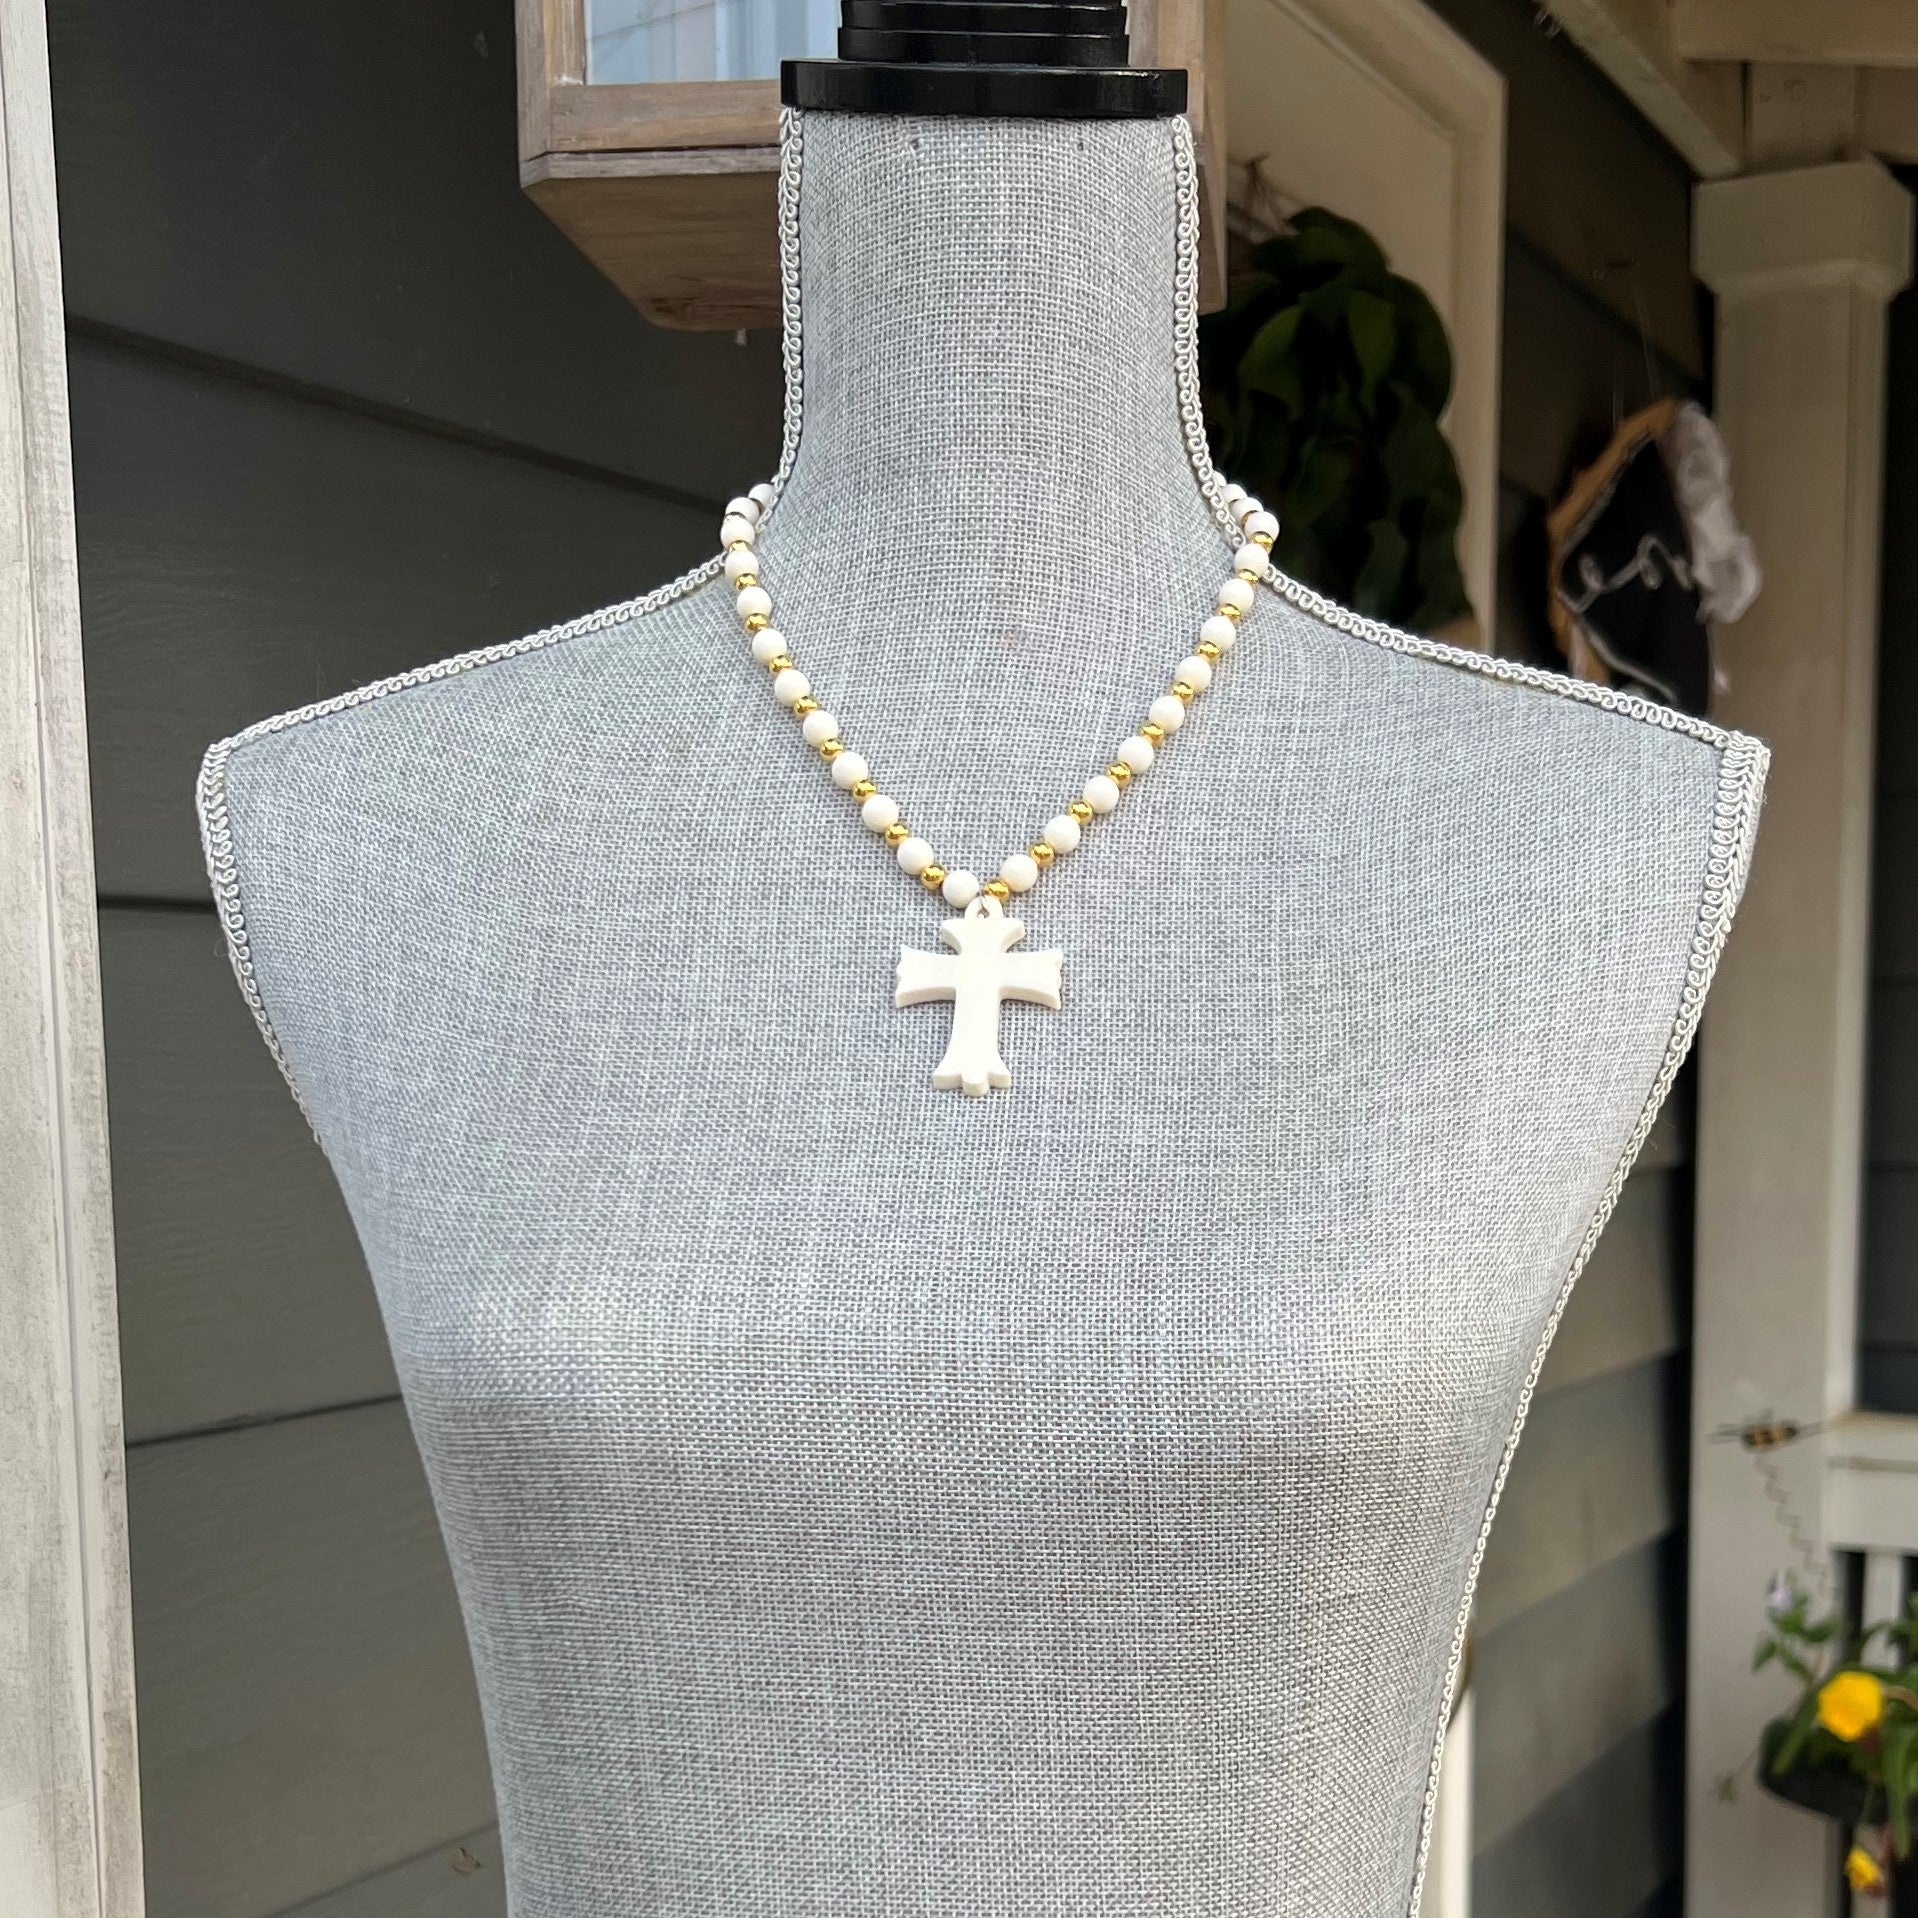 This luxurious necklace is handcrafted with camel bone and gold beads and detailed with an intricately hand-carved cross. The sophisticated materials make this necklace an exquisite addition to any wardrobe.  Approximate Lengths:  Long: 32" Short: 20"